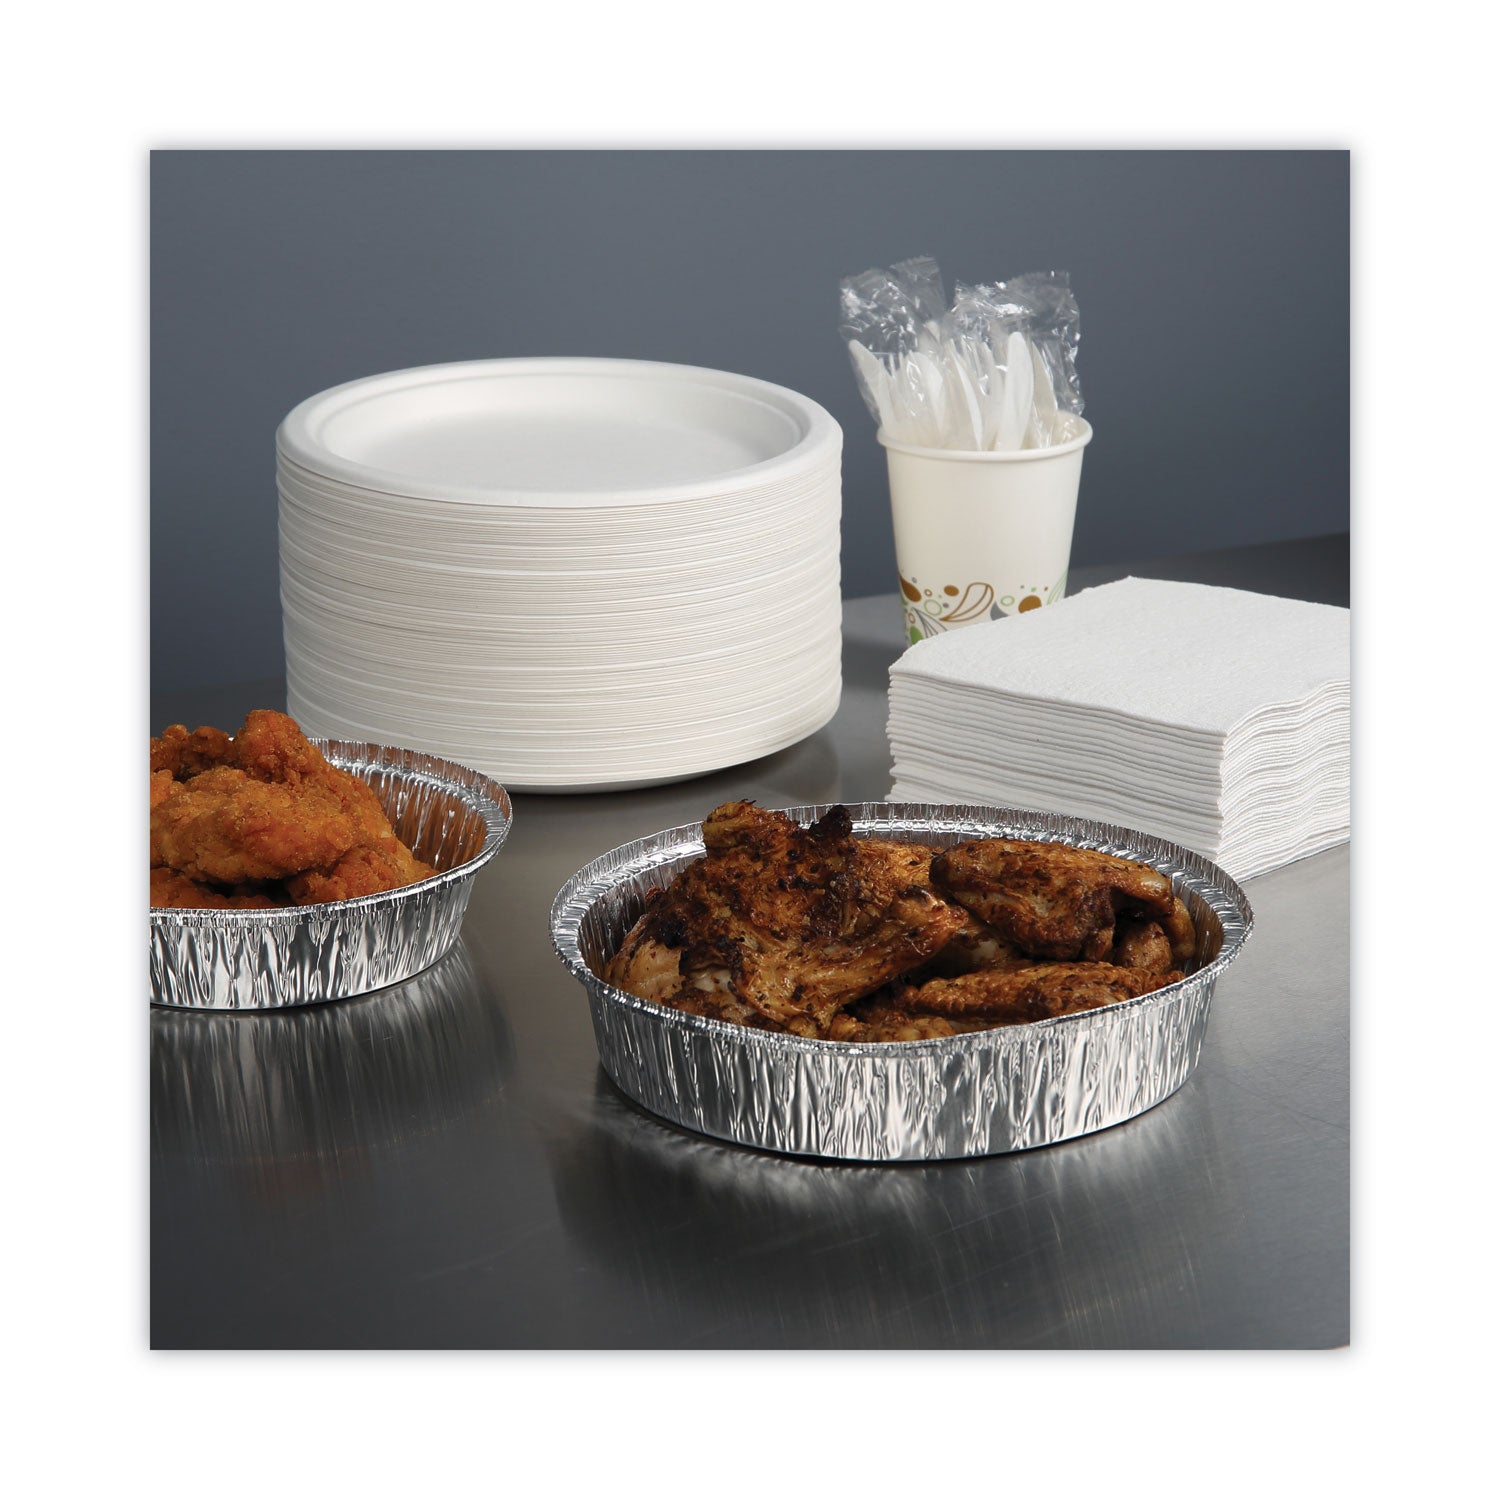 round-aluminum-to-go-containers-48-oz-9-diameter-x-166h-silver-500-carton_bwkround9 - 3